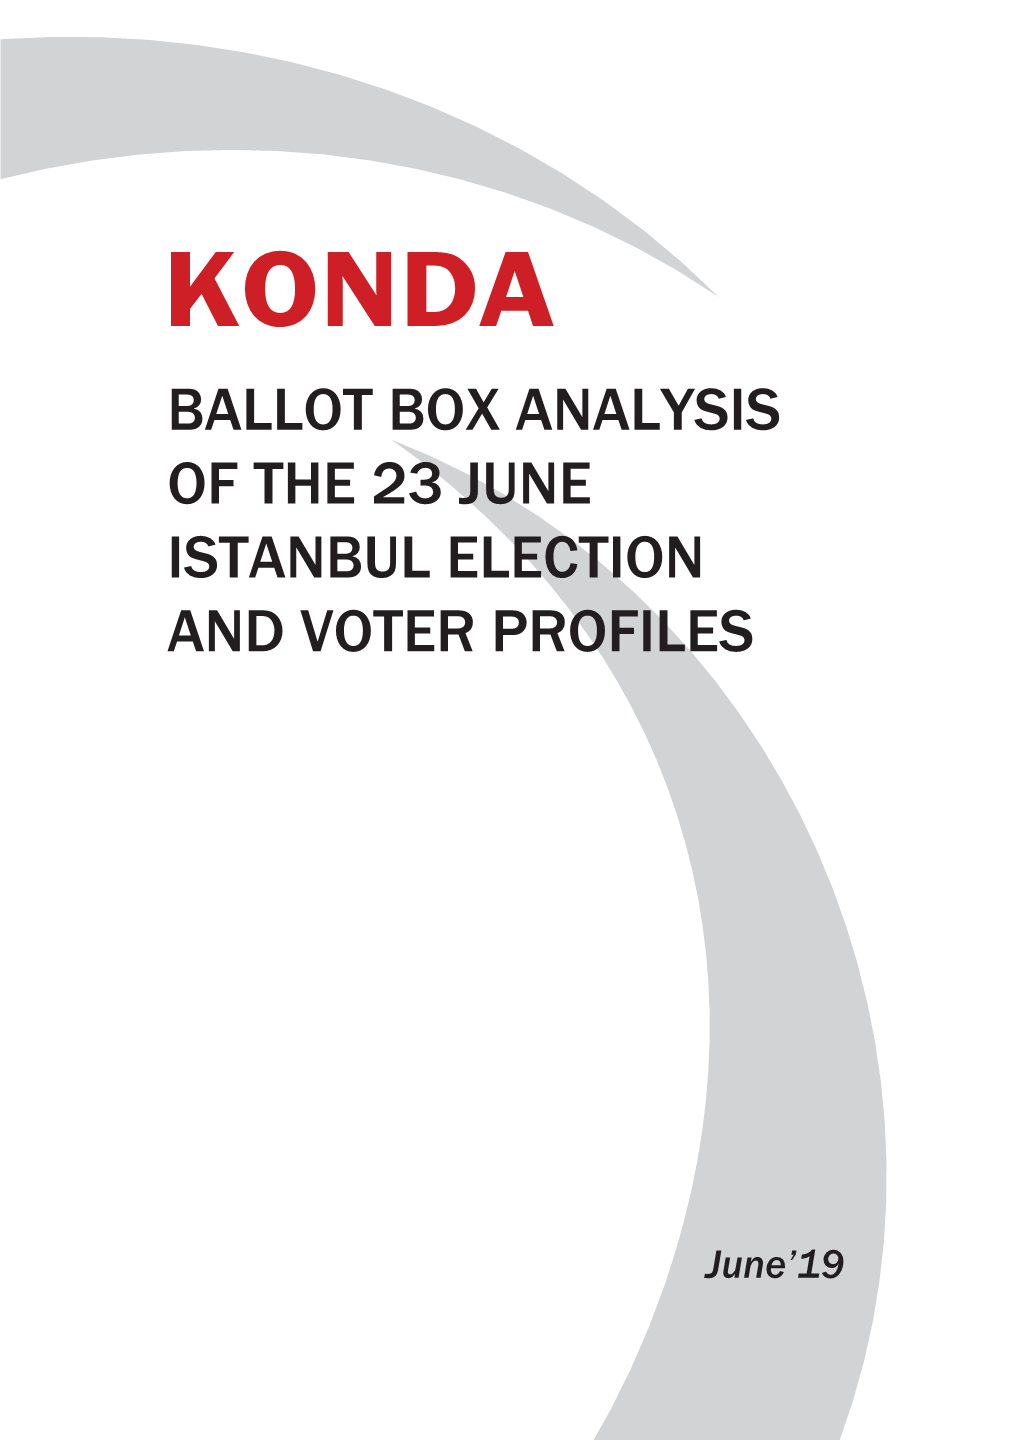 Ballot Box Analysis of the 23 June Istanbul Election and Voter Profiles